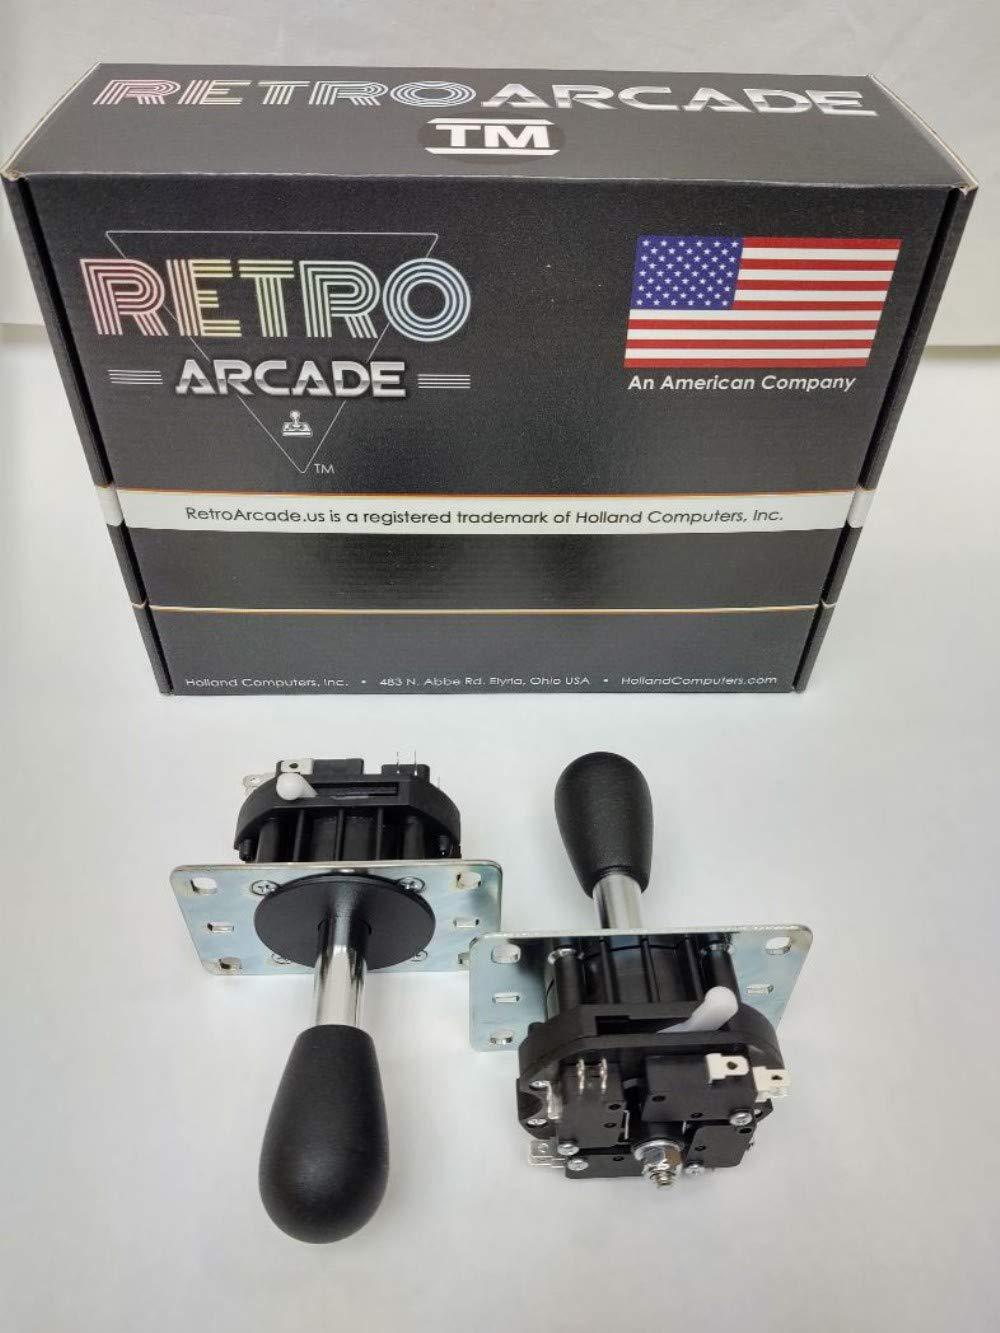 RetroArcade.us mag-stik arcade joystick manually switchable from 4 to 8 way (red) magnetically centered